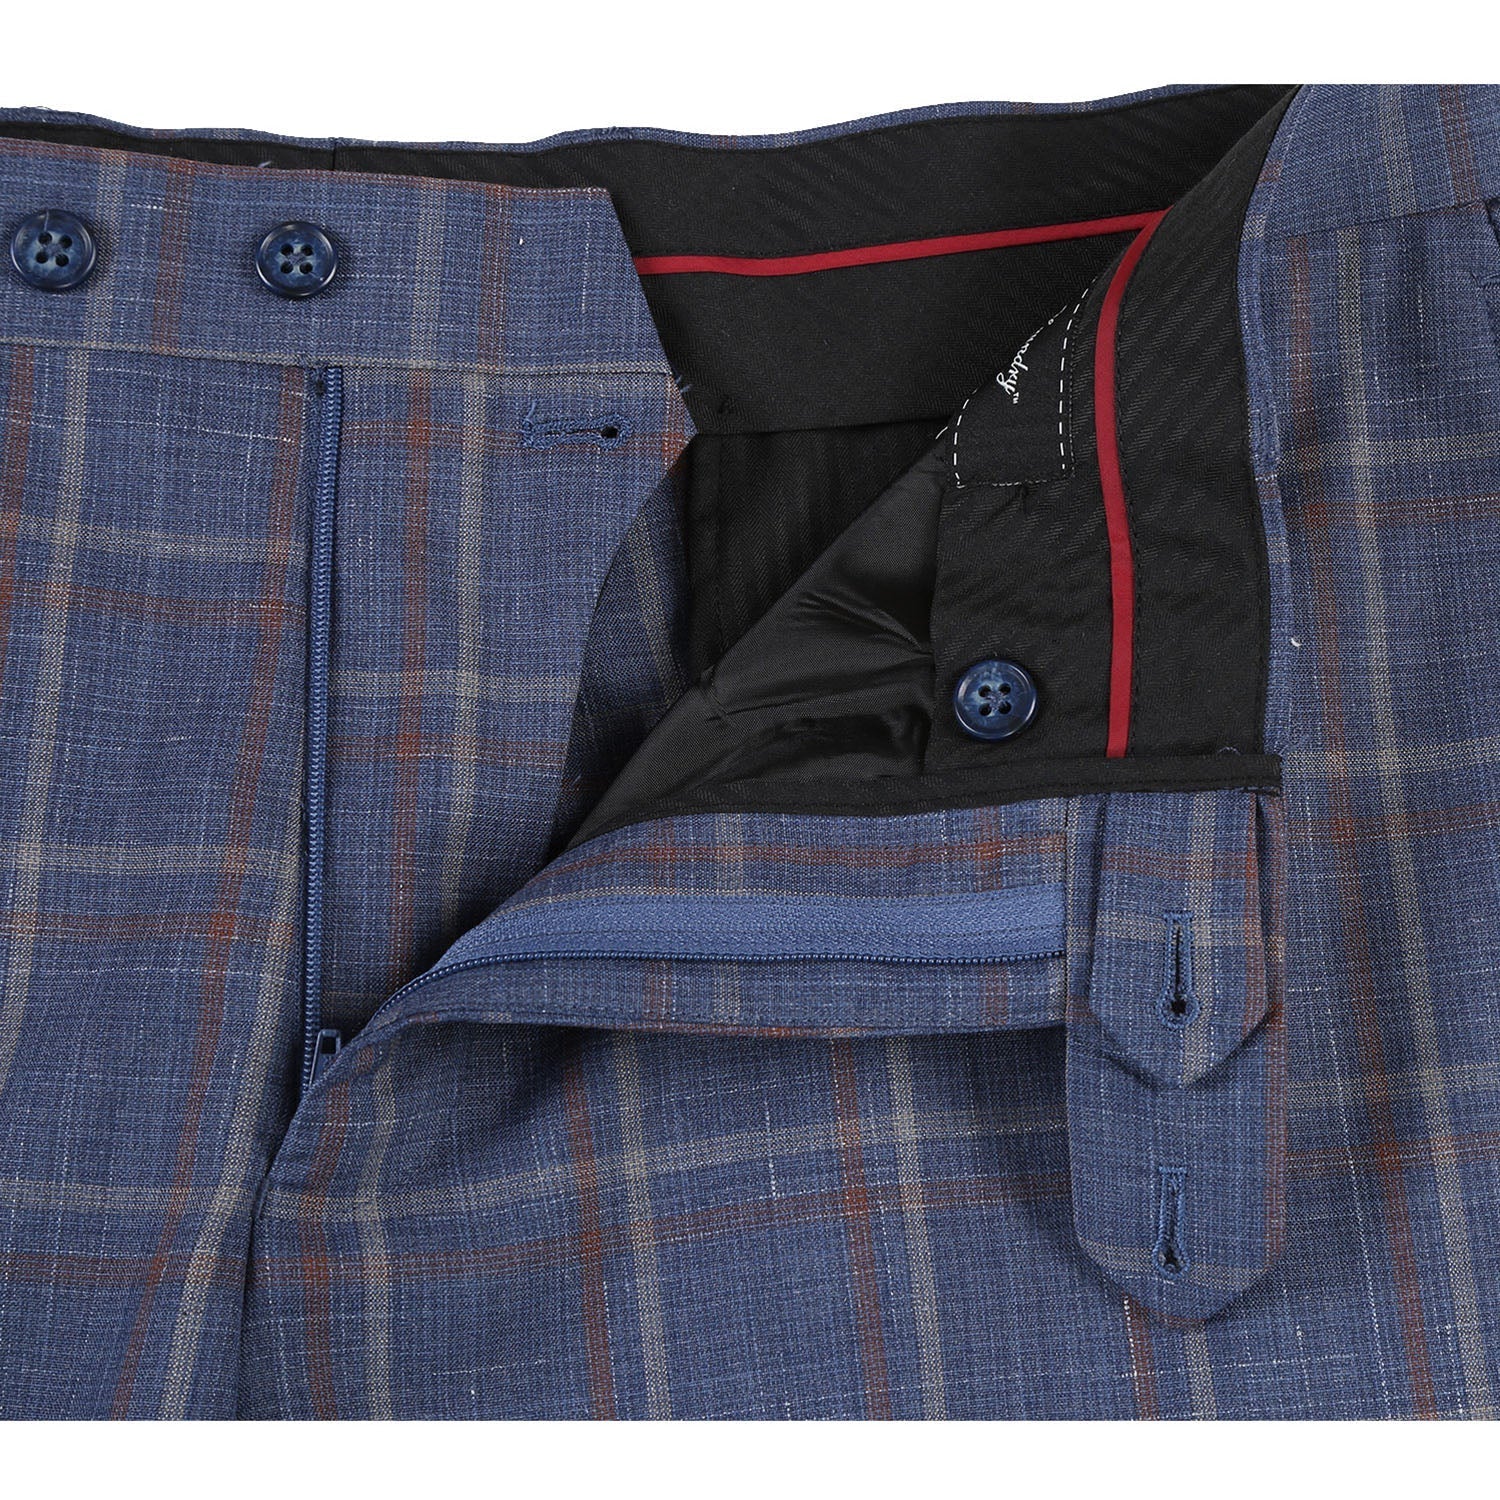 Wool Stretch with Linen Single Breasted SLIM FIT Suit in Steel Blue and Orange Plaid (Short, Regular, and Long Available) by English Laundry